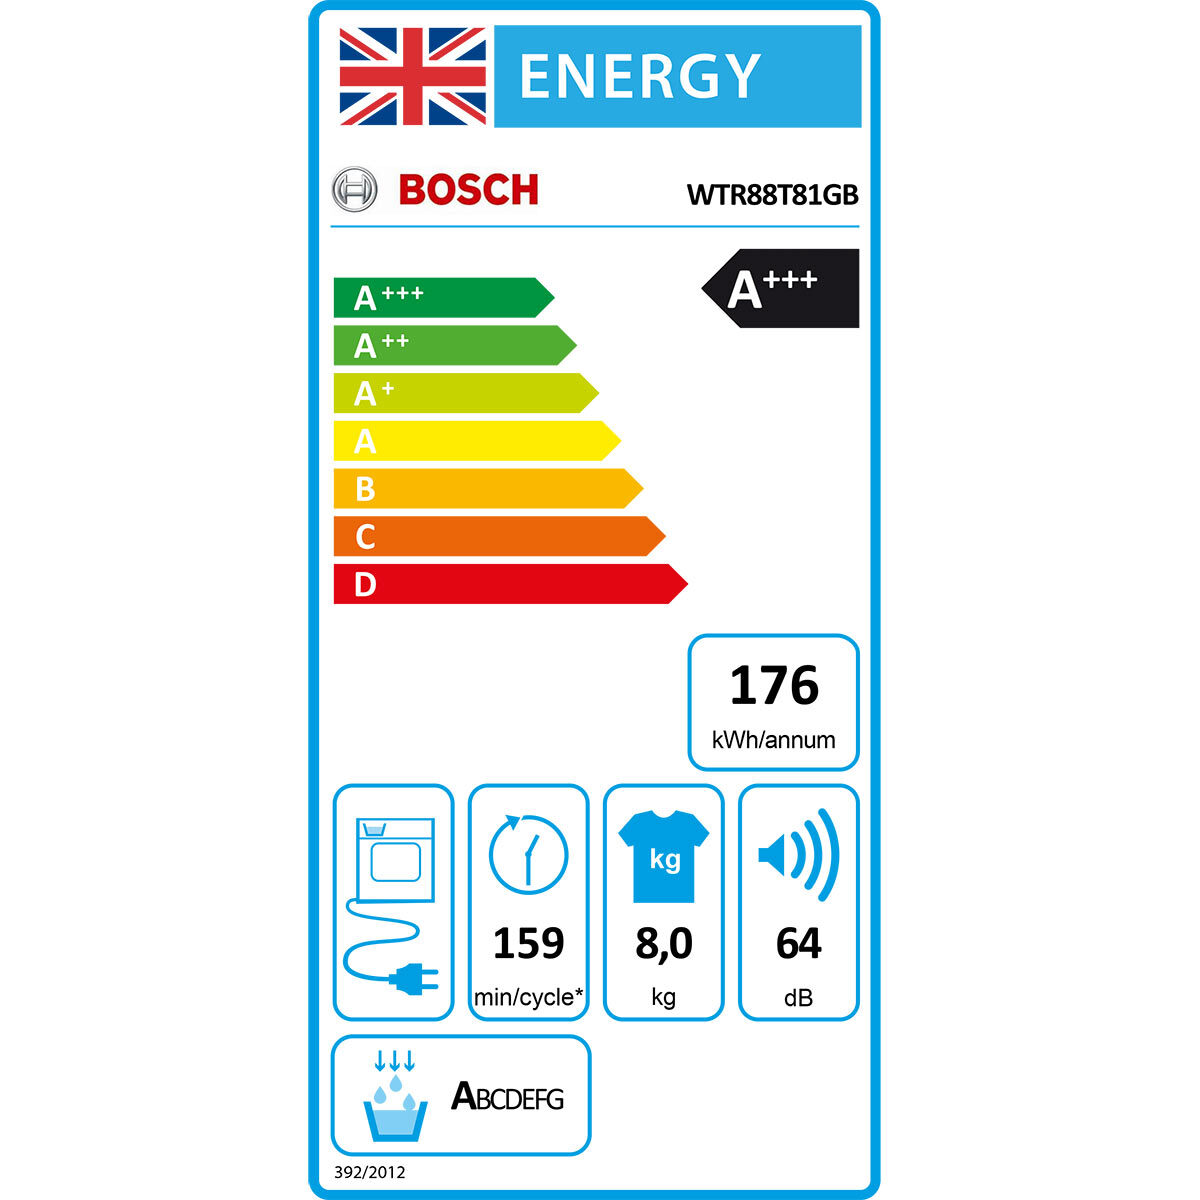 Bosch Serie 6 WTR88T81GB, 8kg, Heat Pump Tumble Dryer, A+++ Rated in White